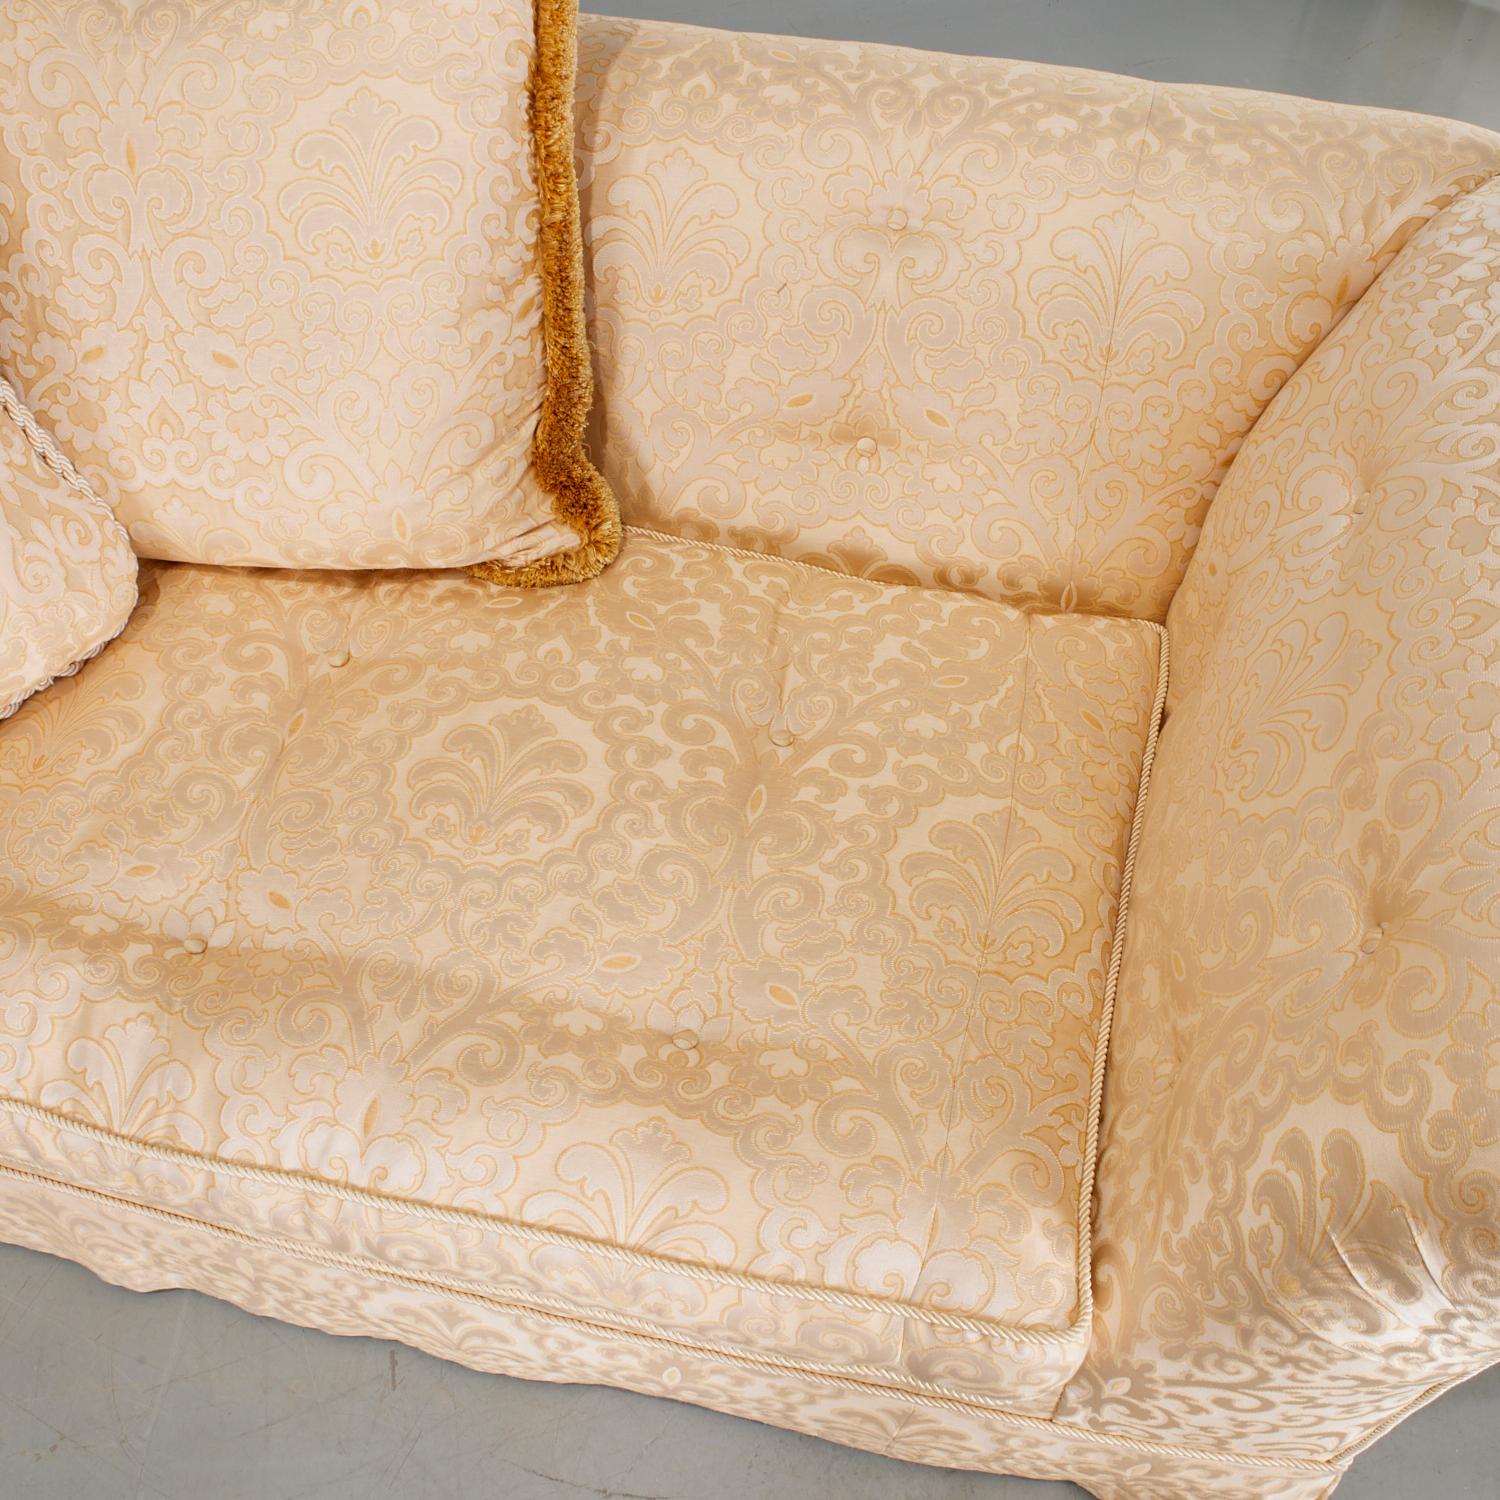 American Matching Pair Late 20th c. Custom Upholstered Cream Silk Damask 3-Seat Sofas For Sale